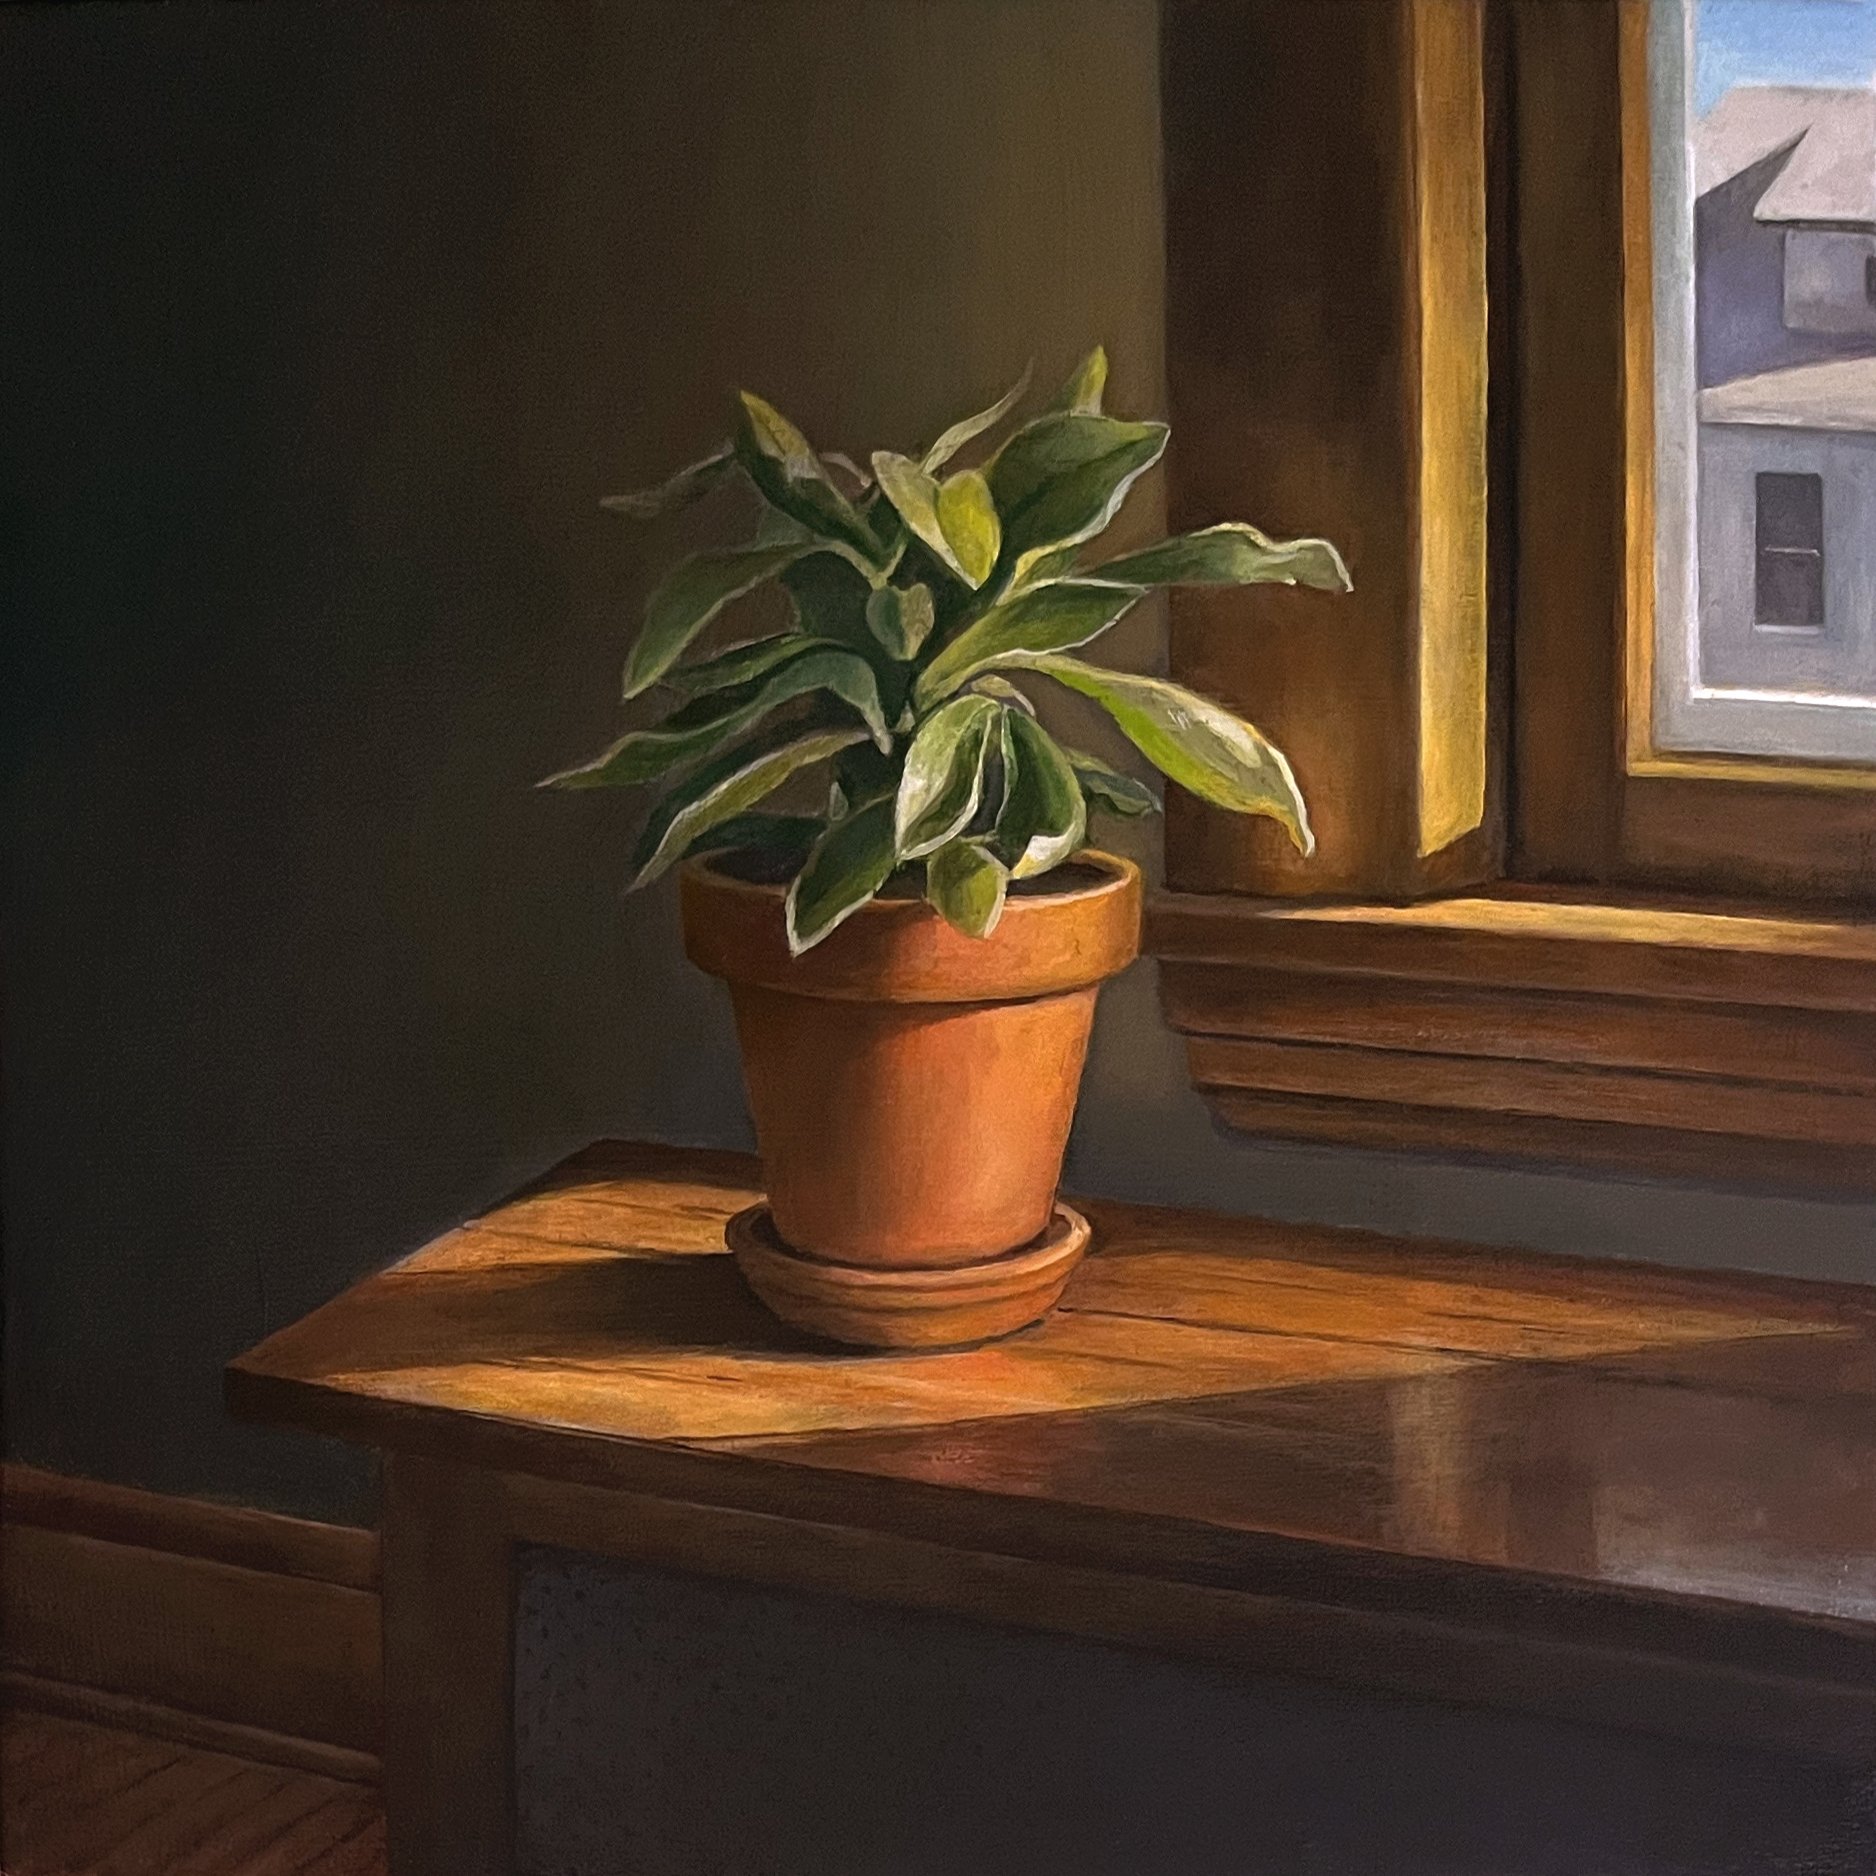   Plant with House in Window   2024  Oil on linen over panel  10 x 10 inches   